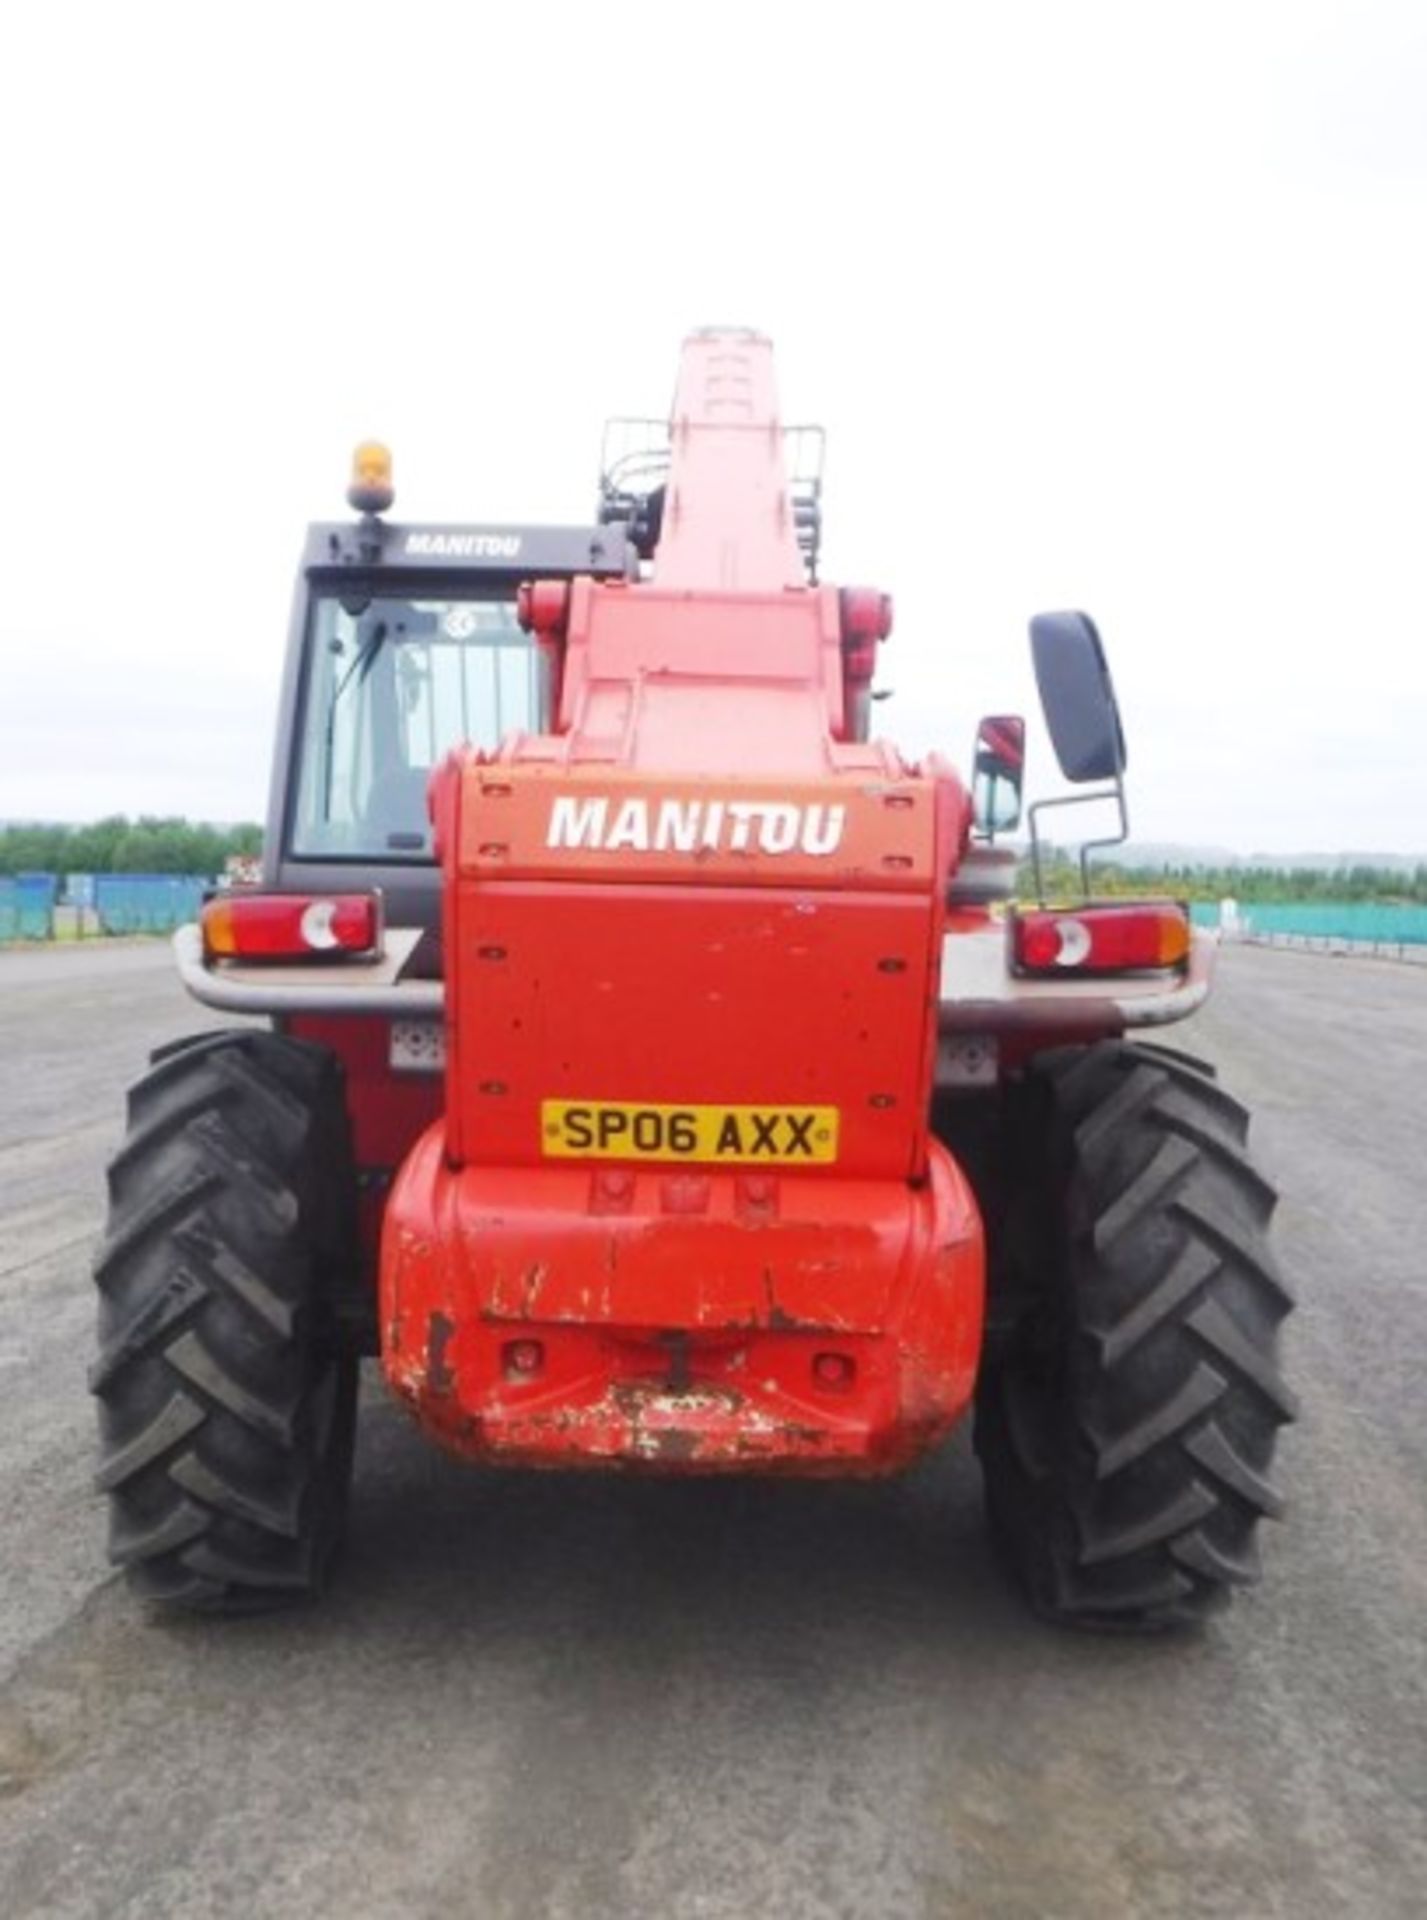 2006 MANITOU 14/35 TELEHANDLER c/w bucket & forks s/n 1230044. Reg no SP06 AXX. 2646HRS. - Image 10 of 16